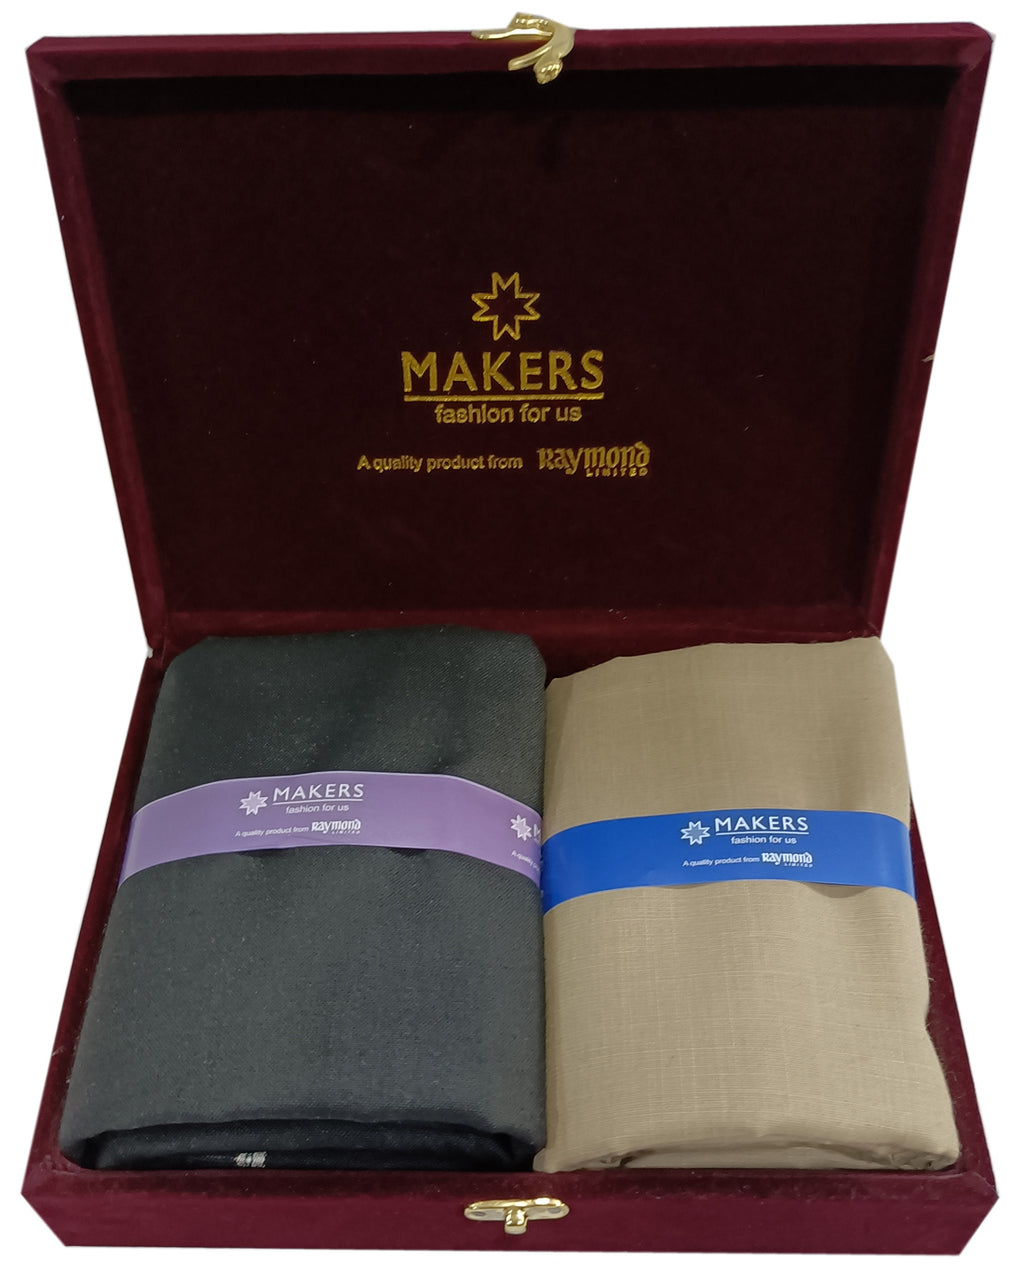 Raymond Tie, Pocket Square And Cufflink Gift Set For Men